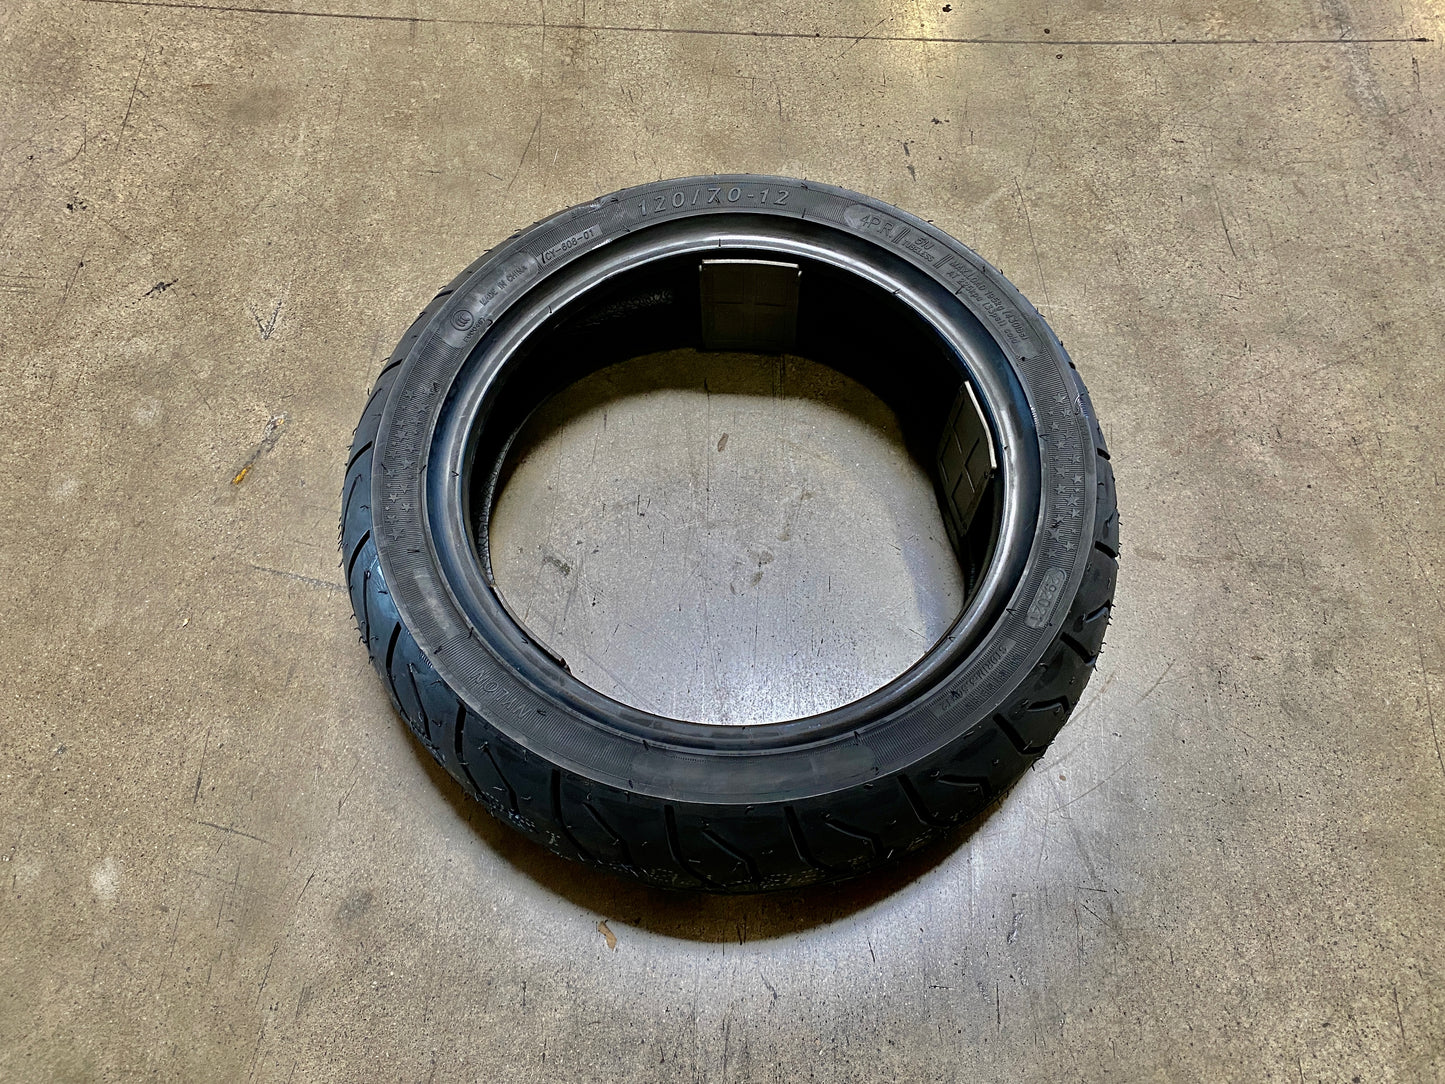 Tire size 120/70-12 for sale ear me. Front tire for Xpro vader